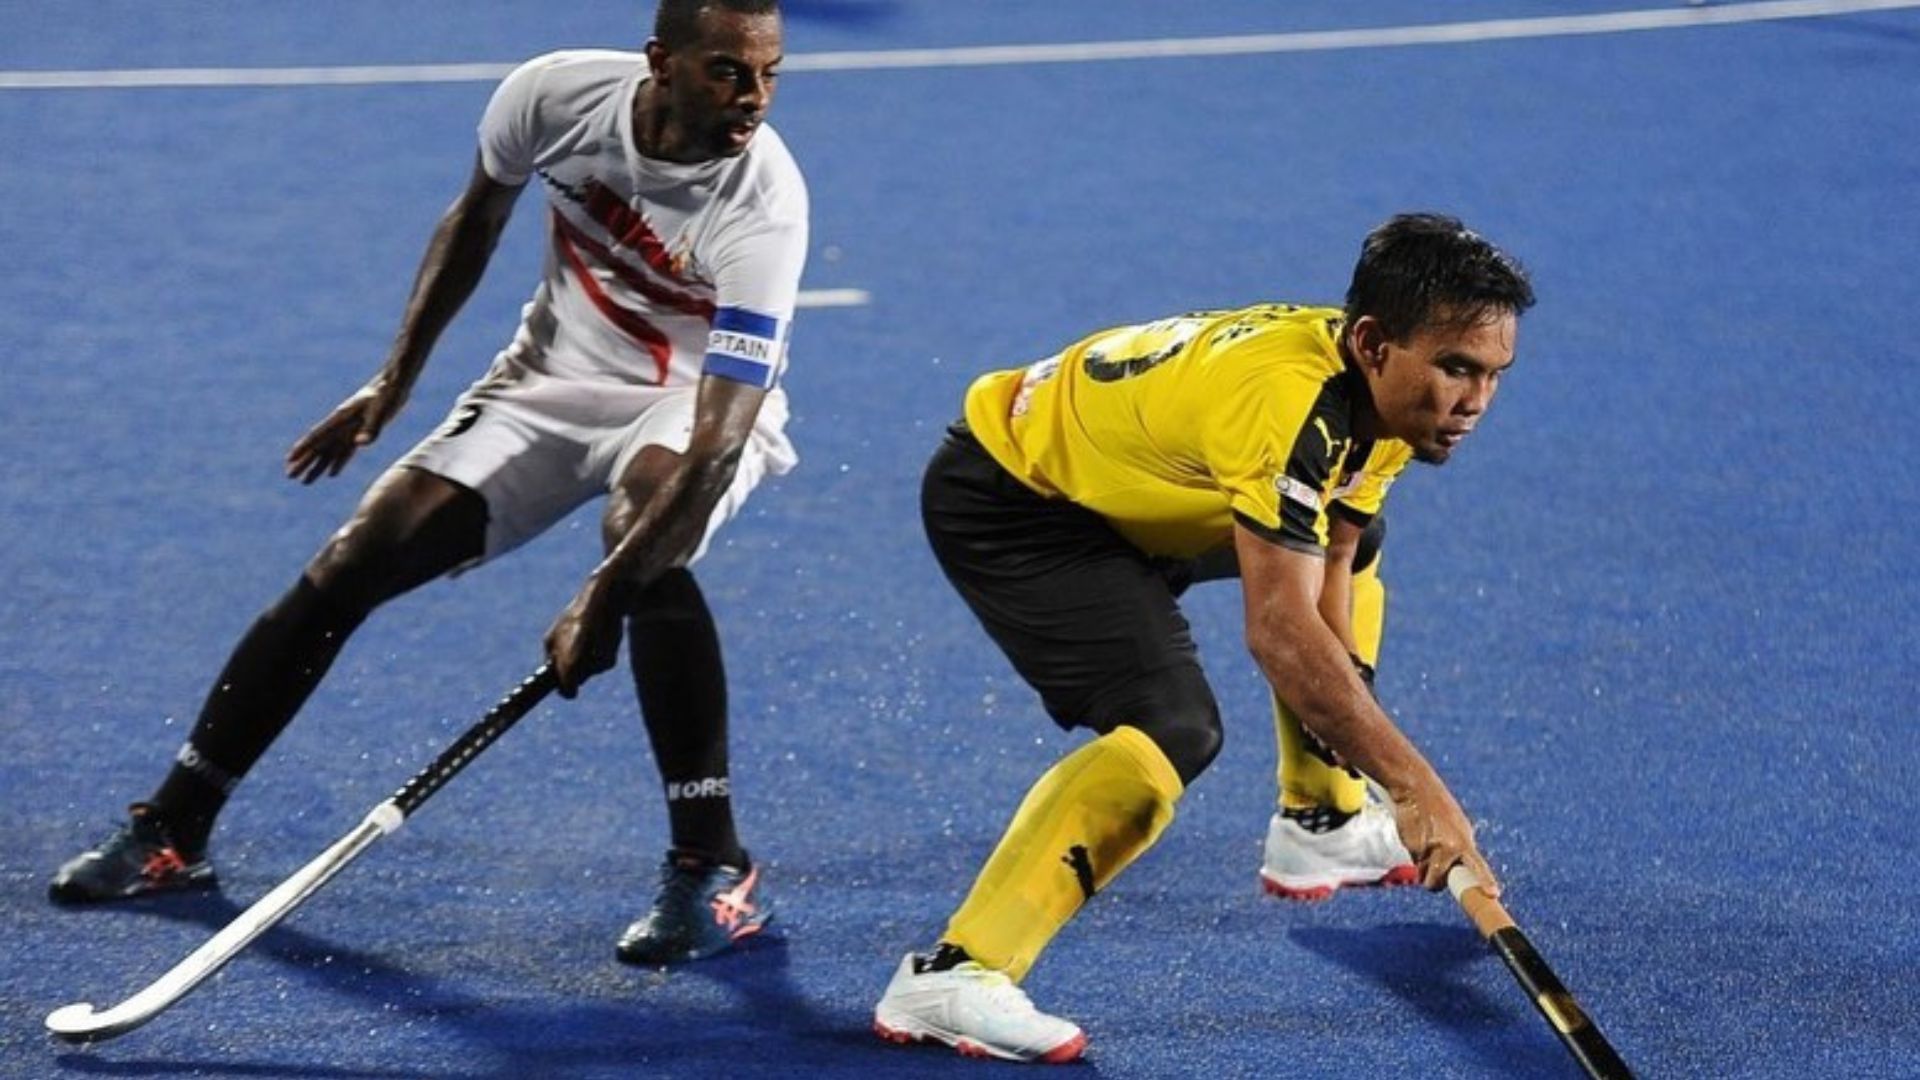 Hockey World Cup 2023 Dates, Match Schedule And Players To Watch